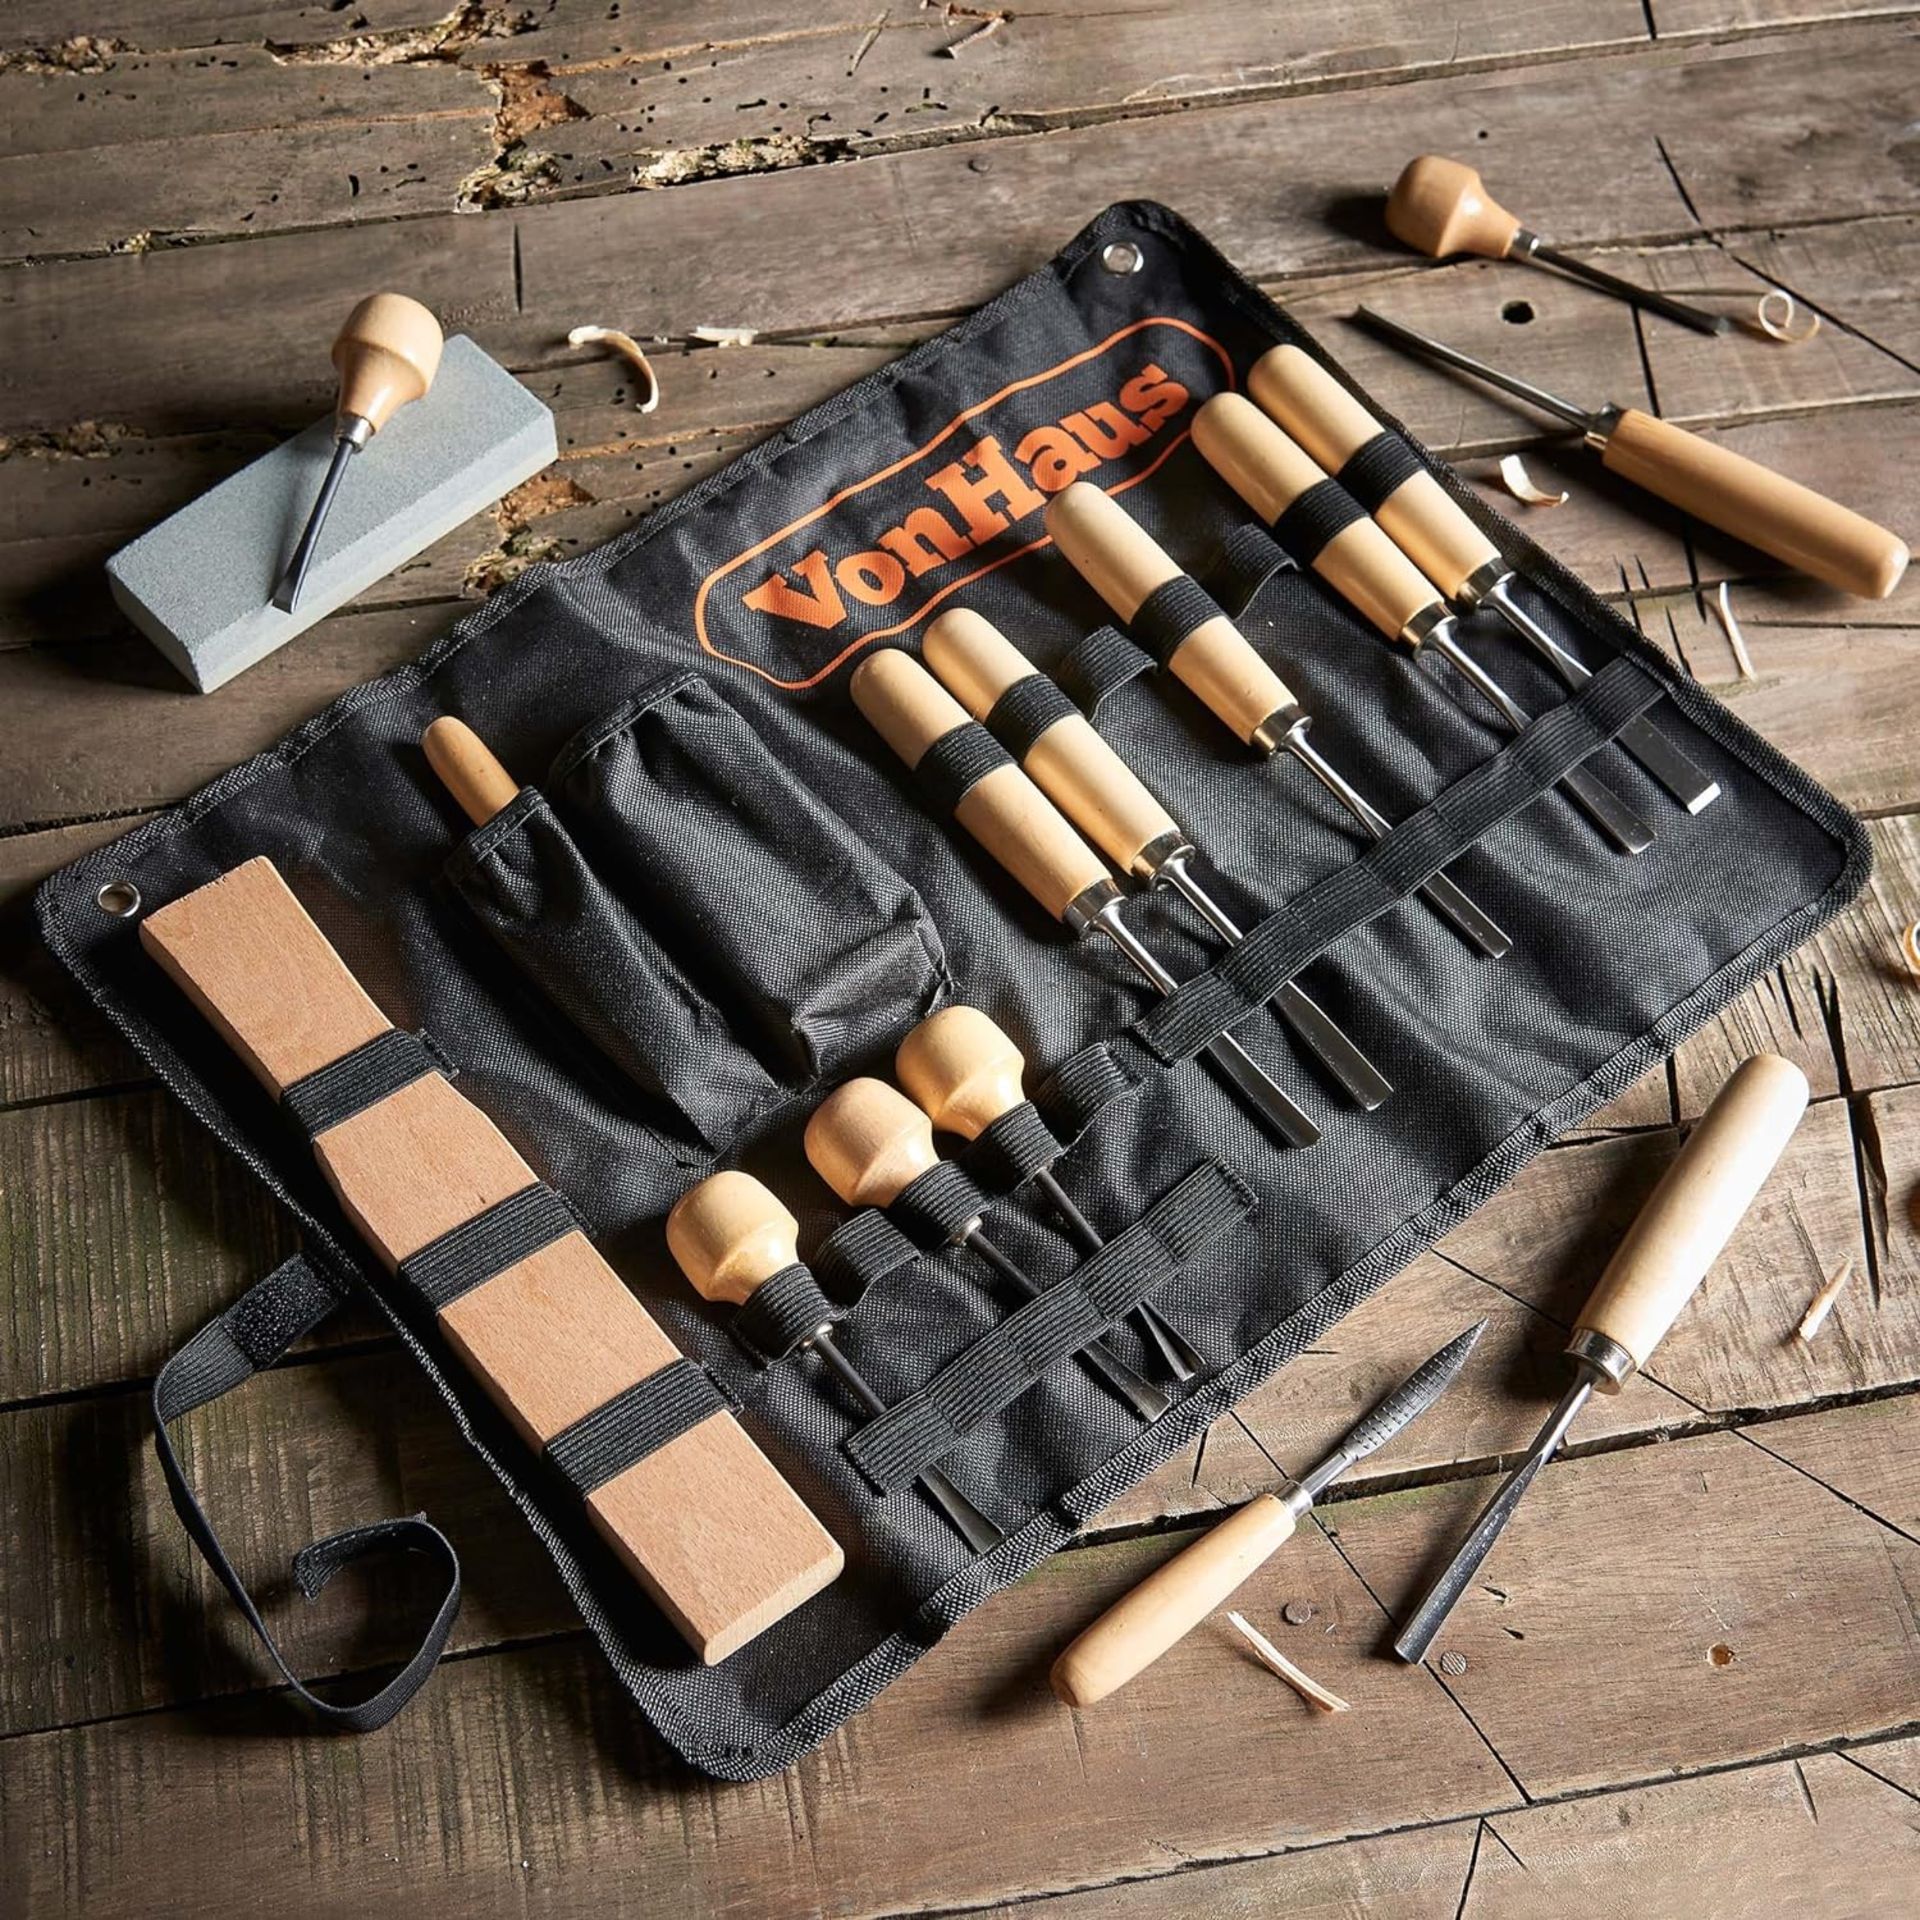 20 X BRAND NEW 16pc Wood Carving Tool Set with Carving Tools Including Files Sharpening Stone & - Image 2 of 2